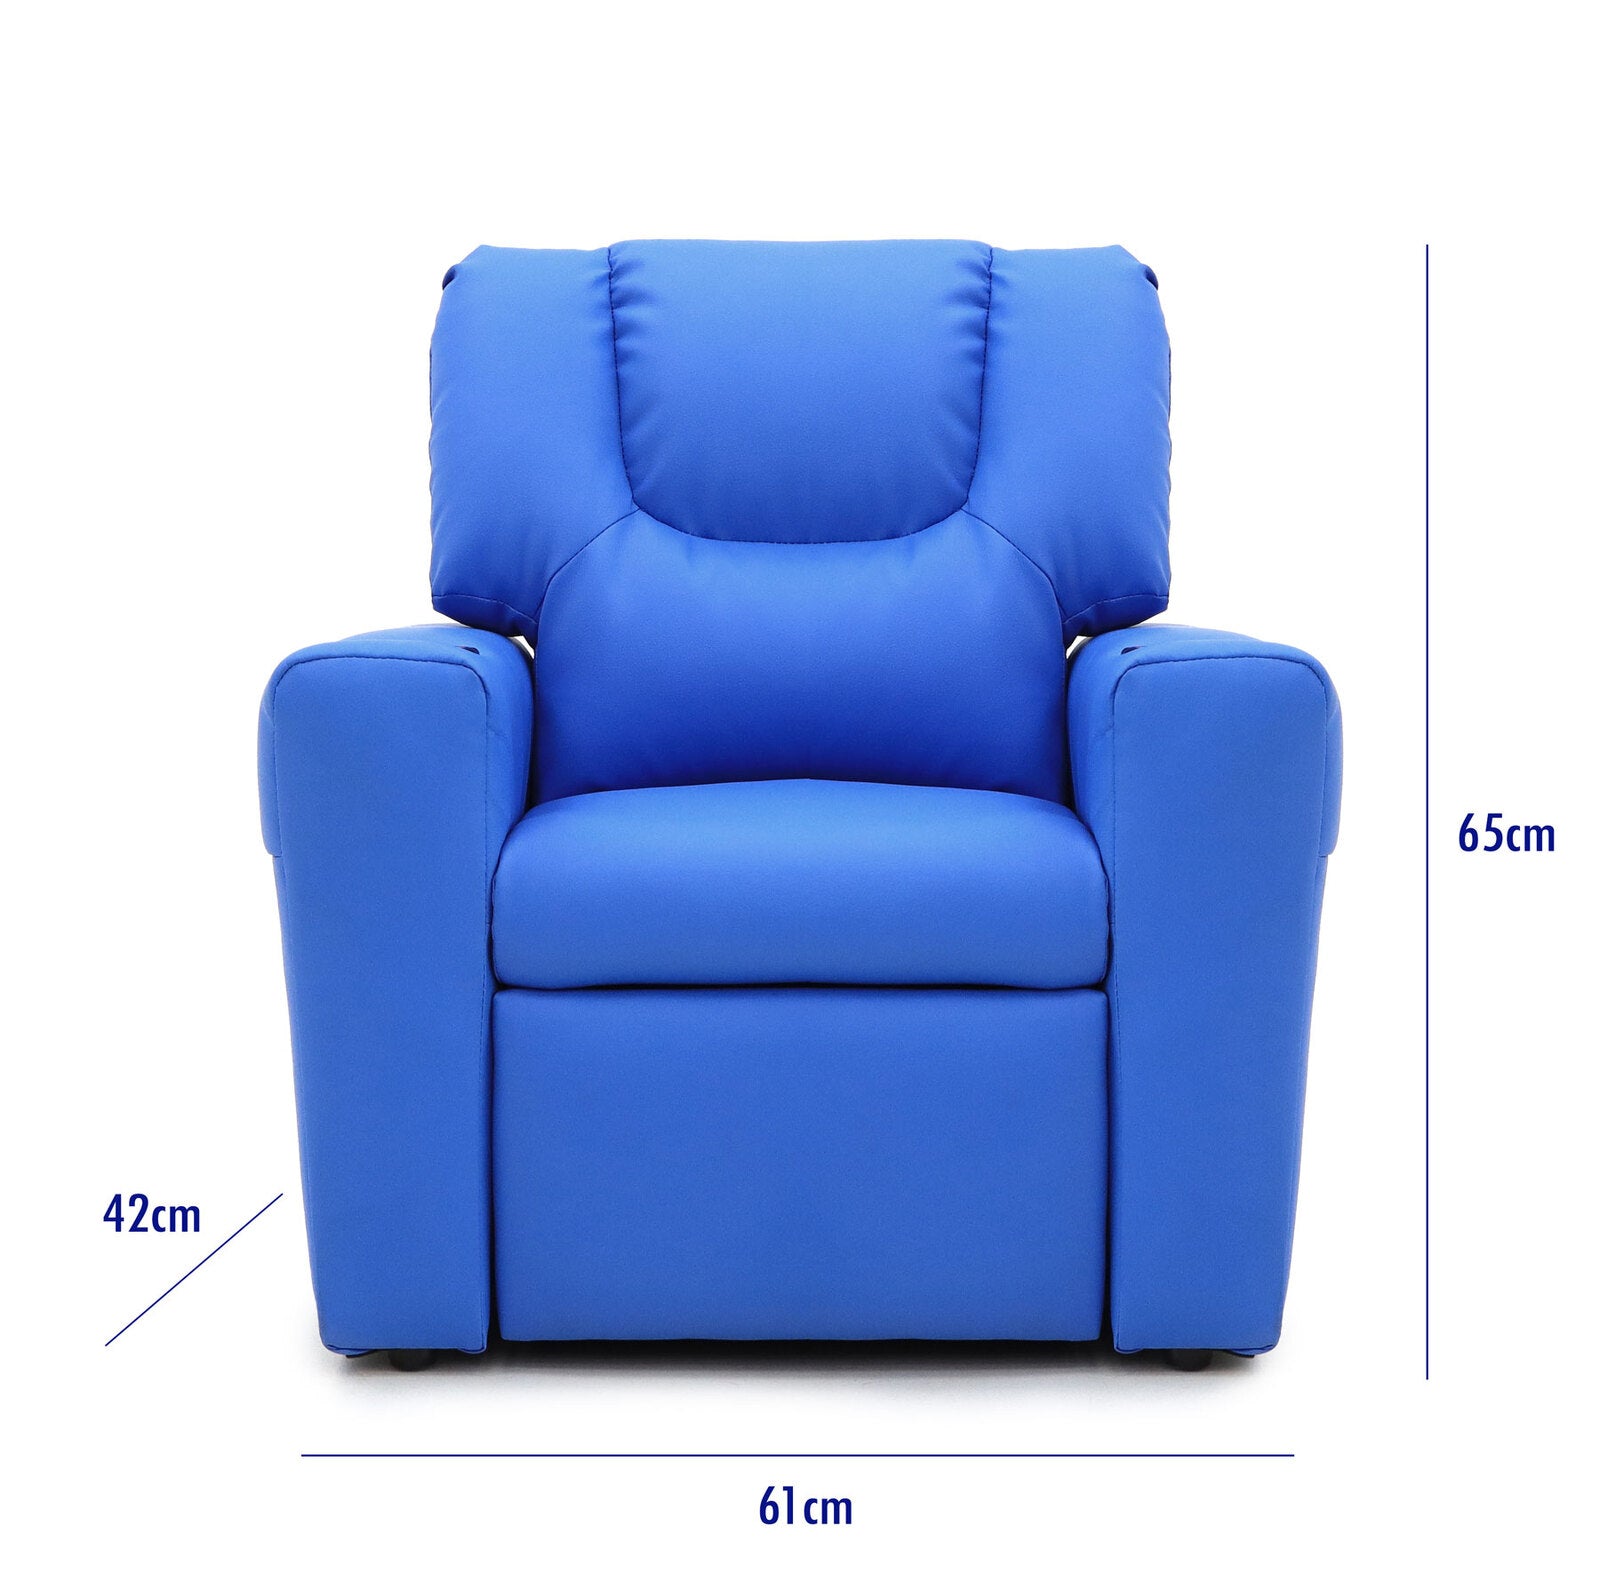 Hacienda Kids Blue Recliner Chair with Built-In Cup Holder & Footrest